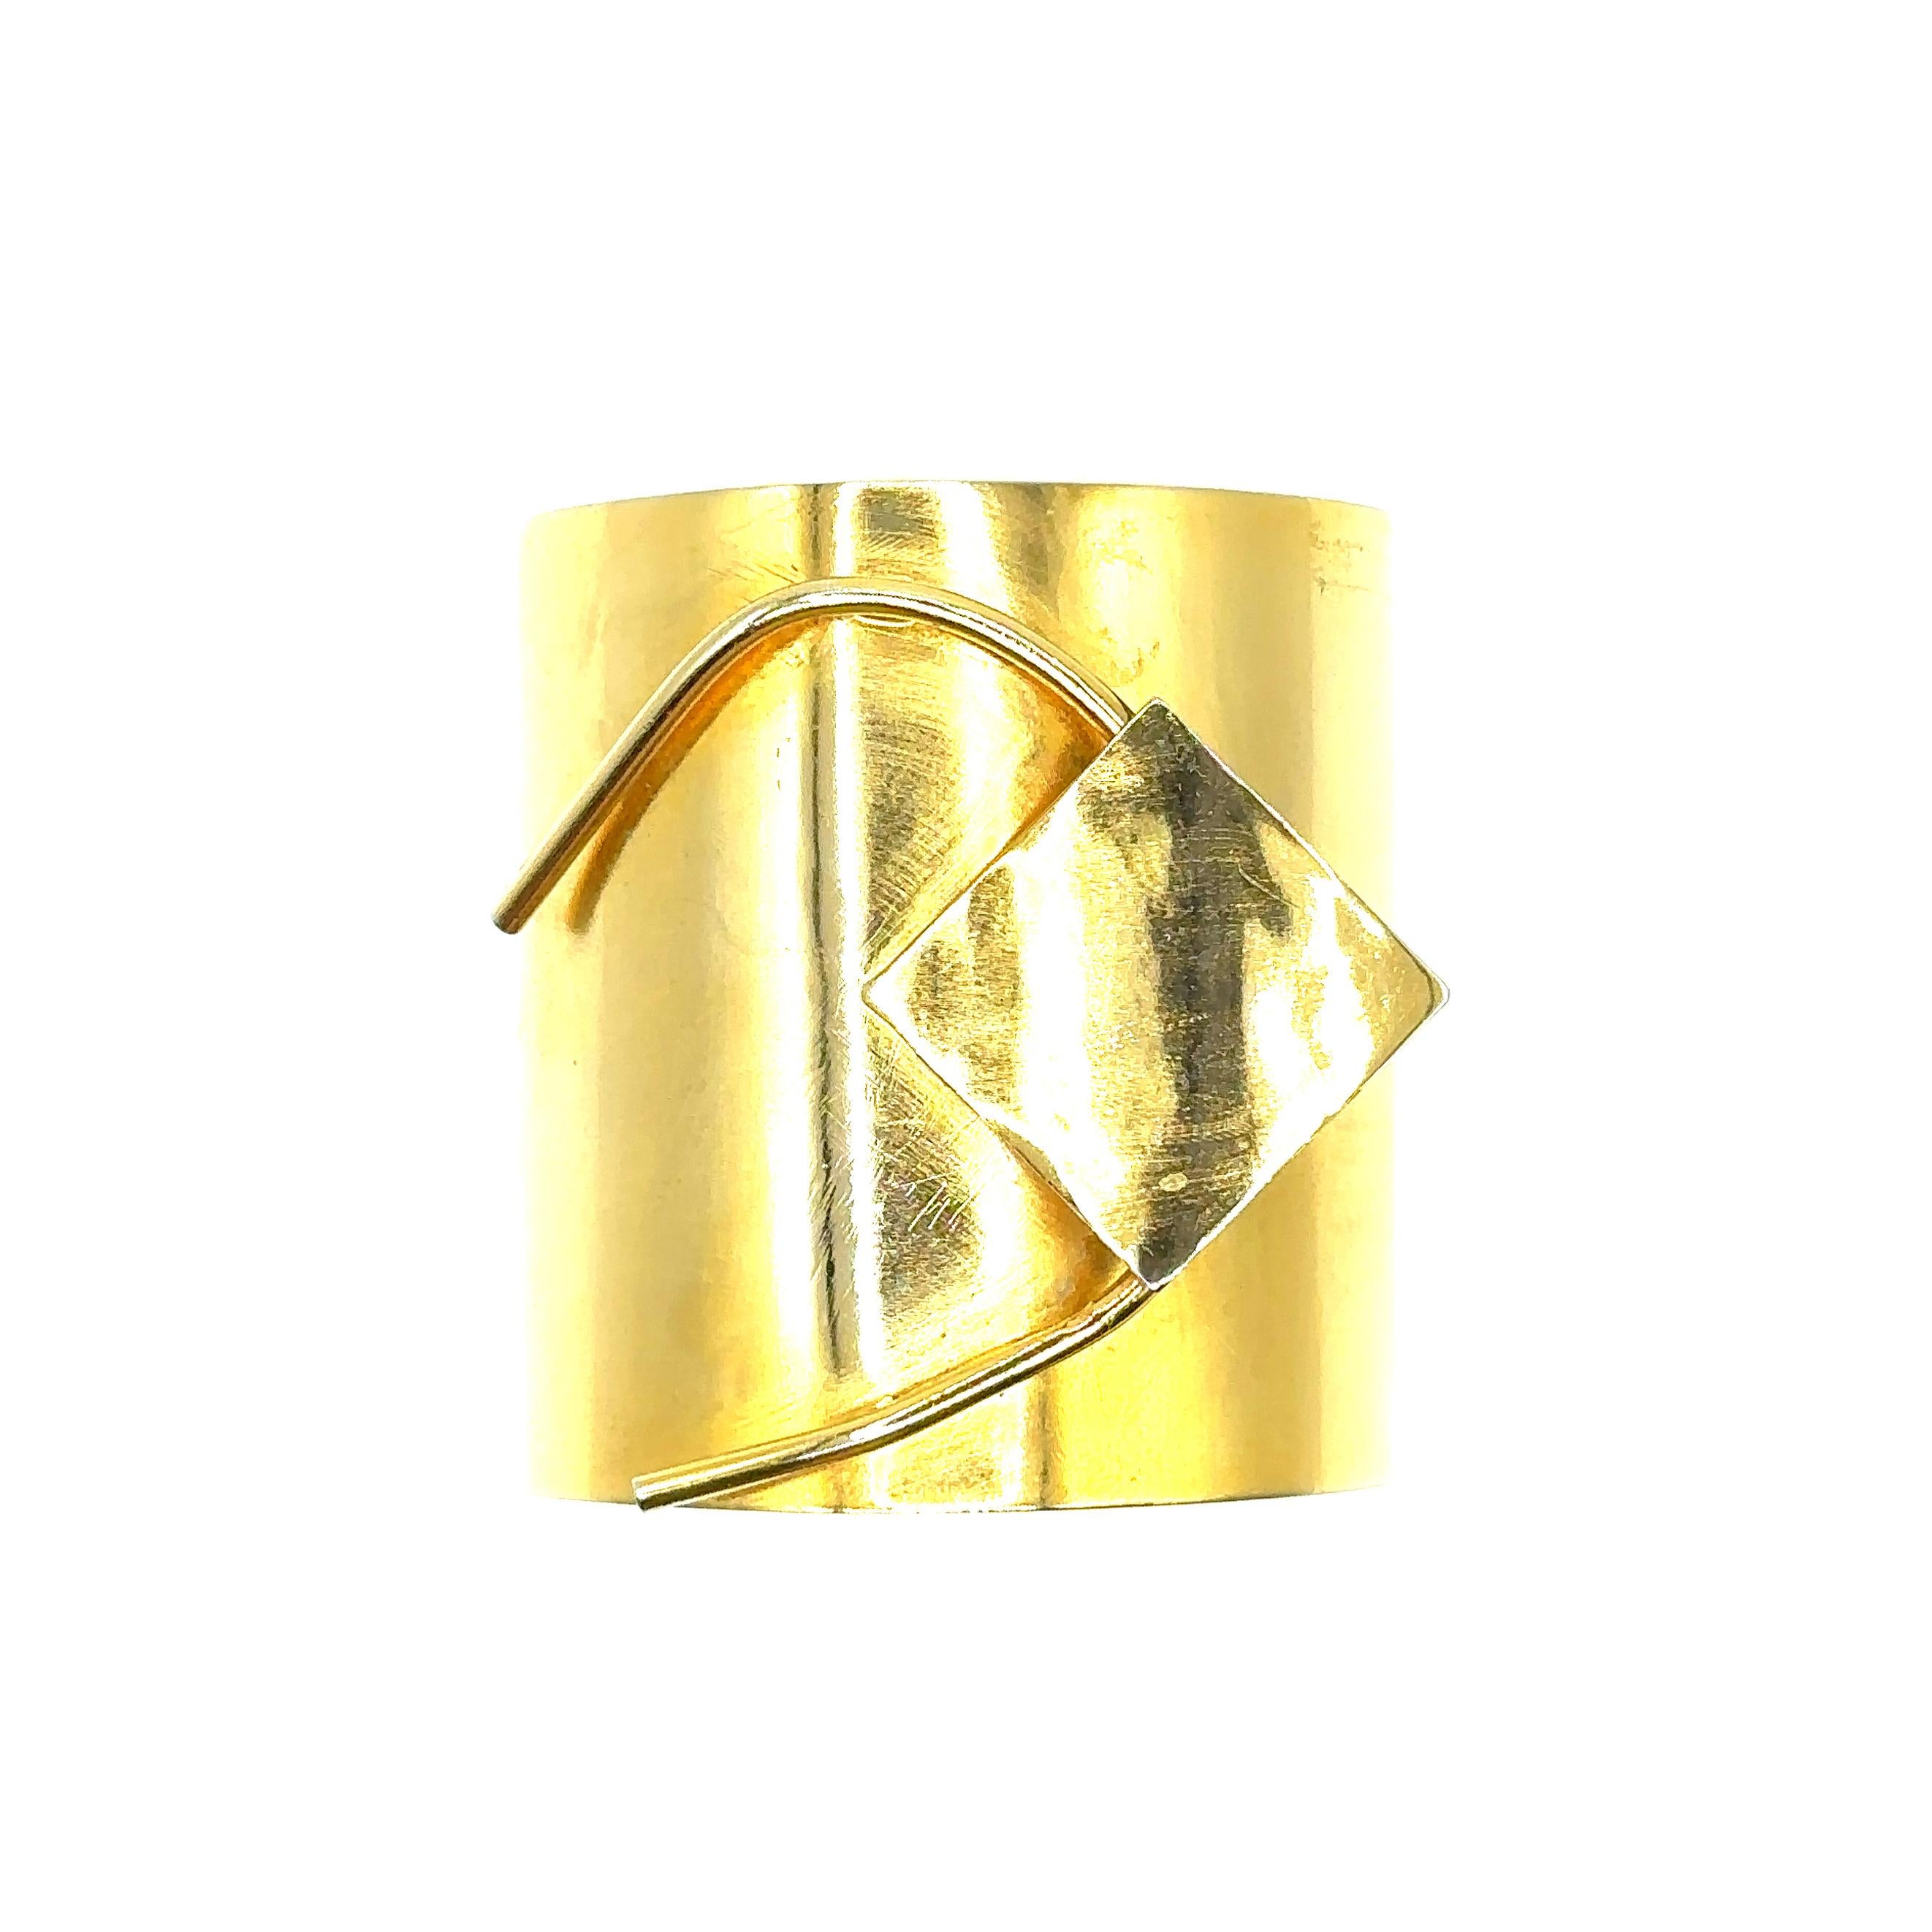 Chloe - Cuff bracelet 14k gold plated In New Condition For Sale In Forest Hills, NY